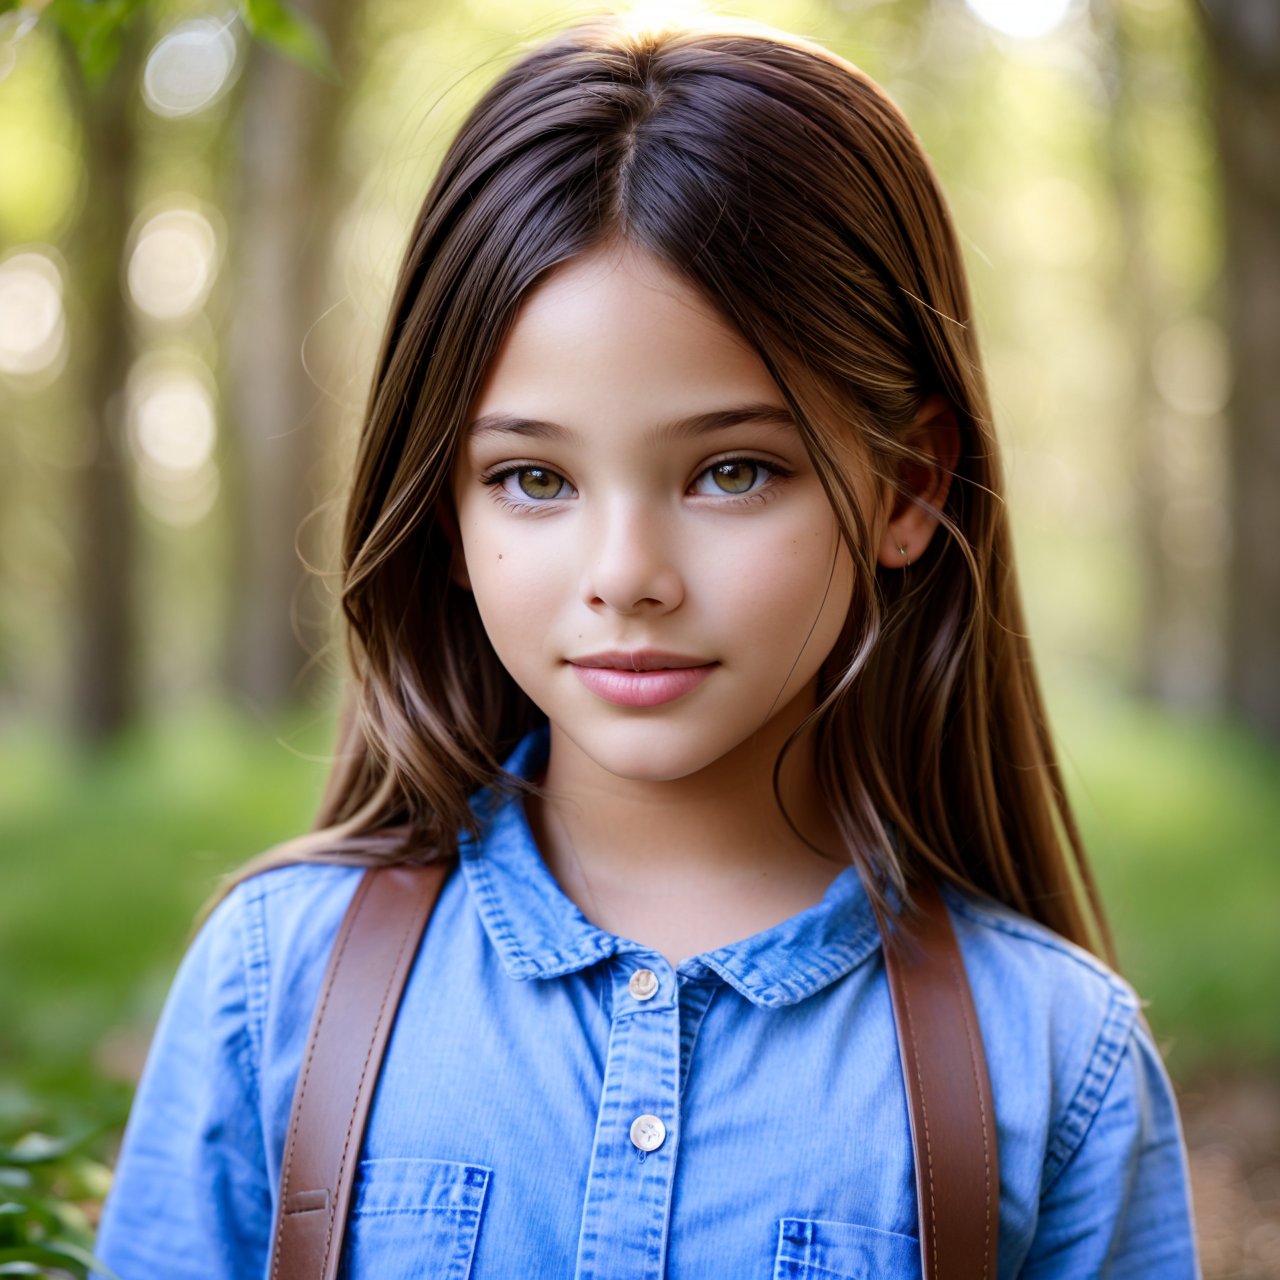 extra resolution, looking at viewer, portrait of stunning (AIDA_LoRA_LG2014:1.05) <lora:AIDA_LoRA_LG2014:0.7> as little girl wearing a t-shirt and denim skirt in the field with trees on the backgrounds, pretty face, naughty, funny, happy, playful, intimate, flirting with camera, cinematic, hyper realistic, studio photo, studio photo, kkw-ph1, hdr, f1.6, getty images, (colorful:1.1)